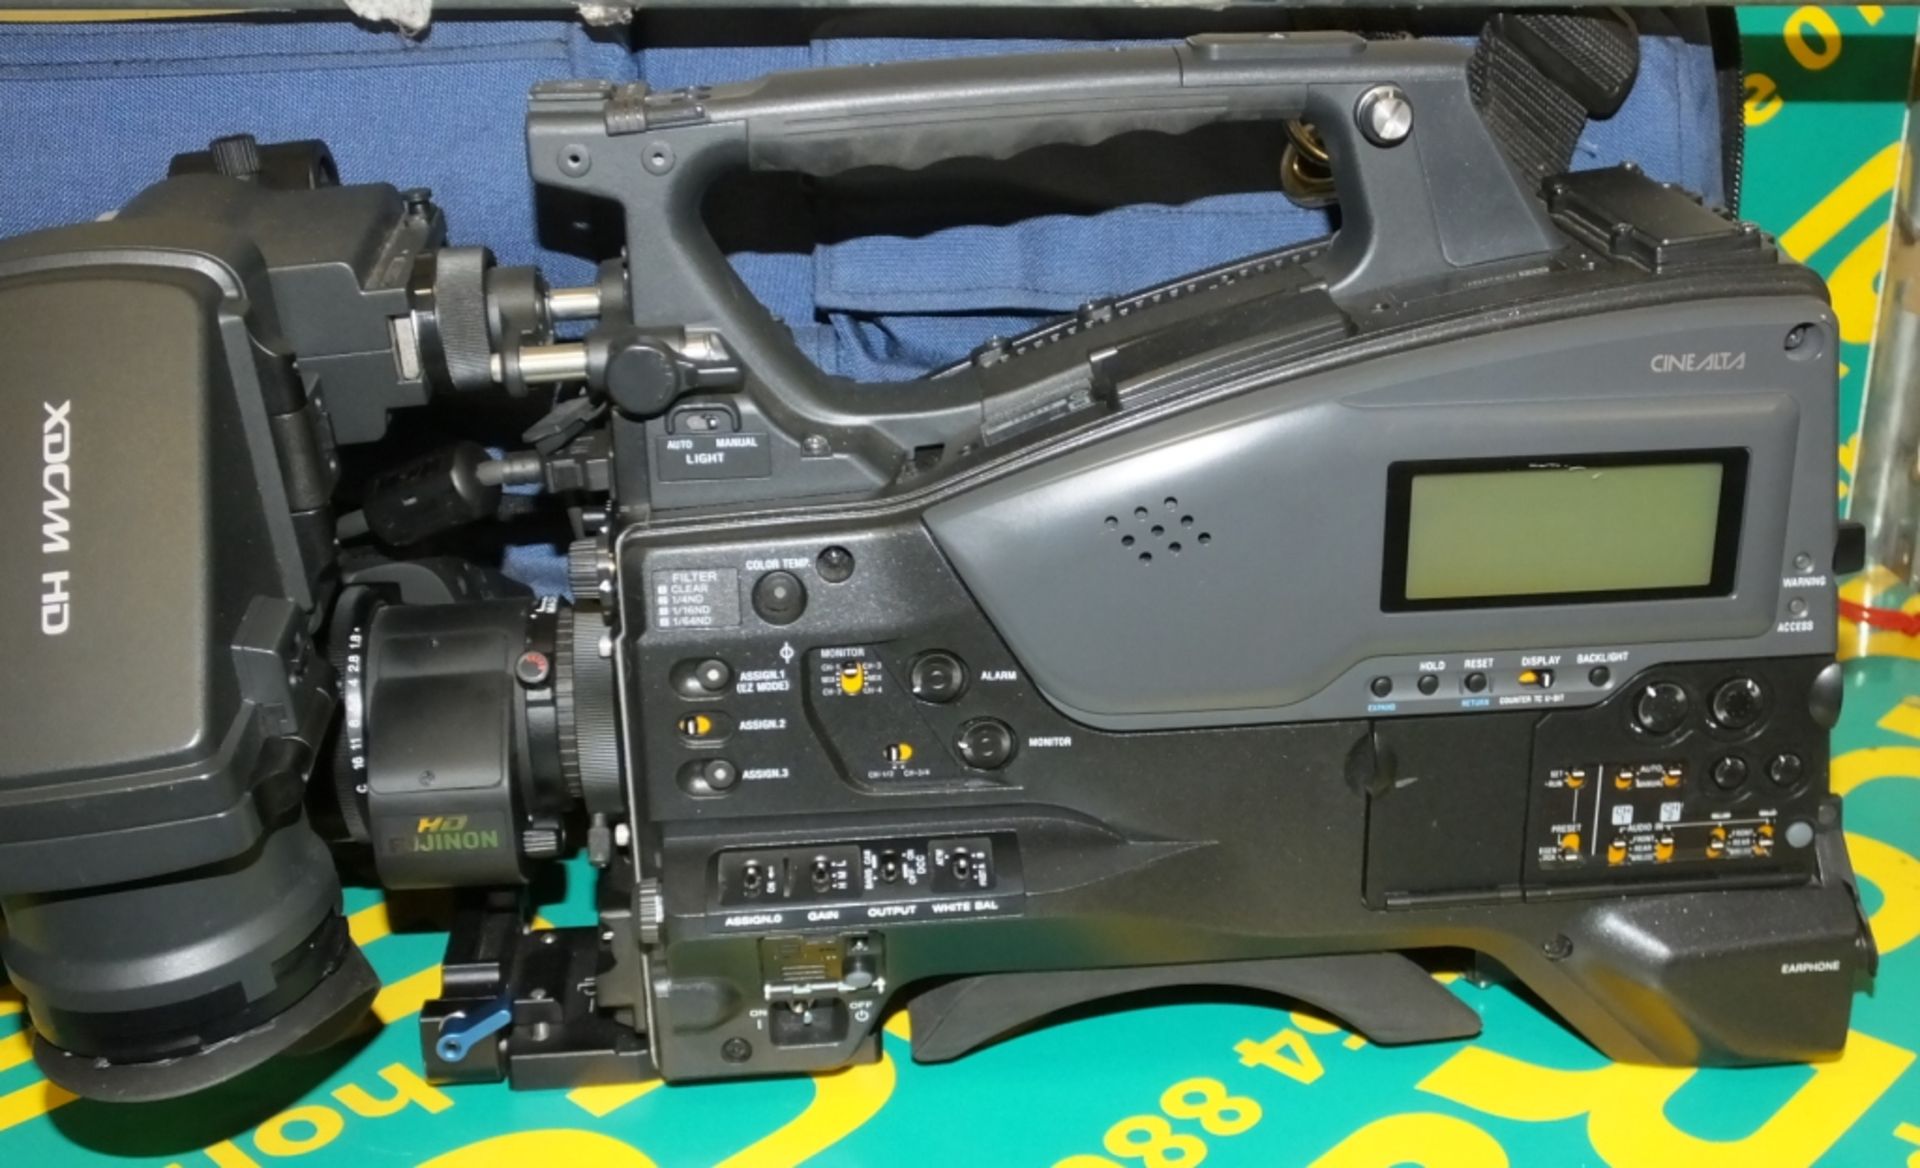 Sony PMW-350 Professional Camcorder with carry bag - no other accessories - Image 3 of 10